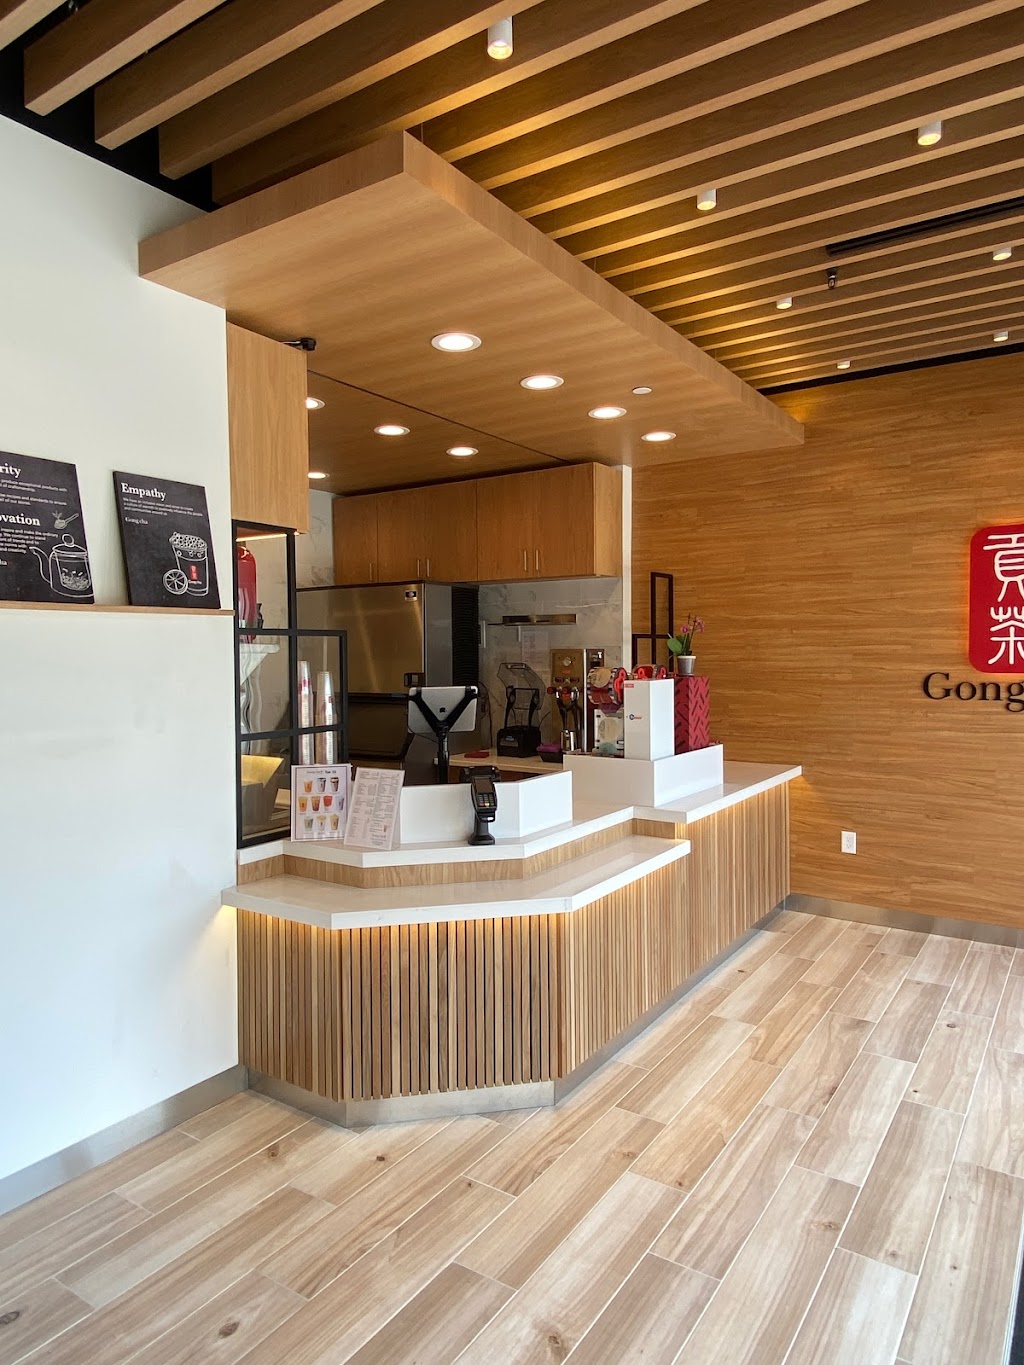 Gong Cha Woodbury Common Outlet | 714 Race Track Lane, Central Valley, NY 10917, USA | Phone: (845) 868-6898